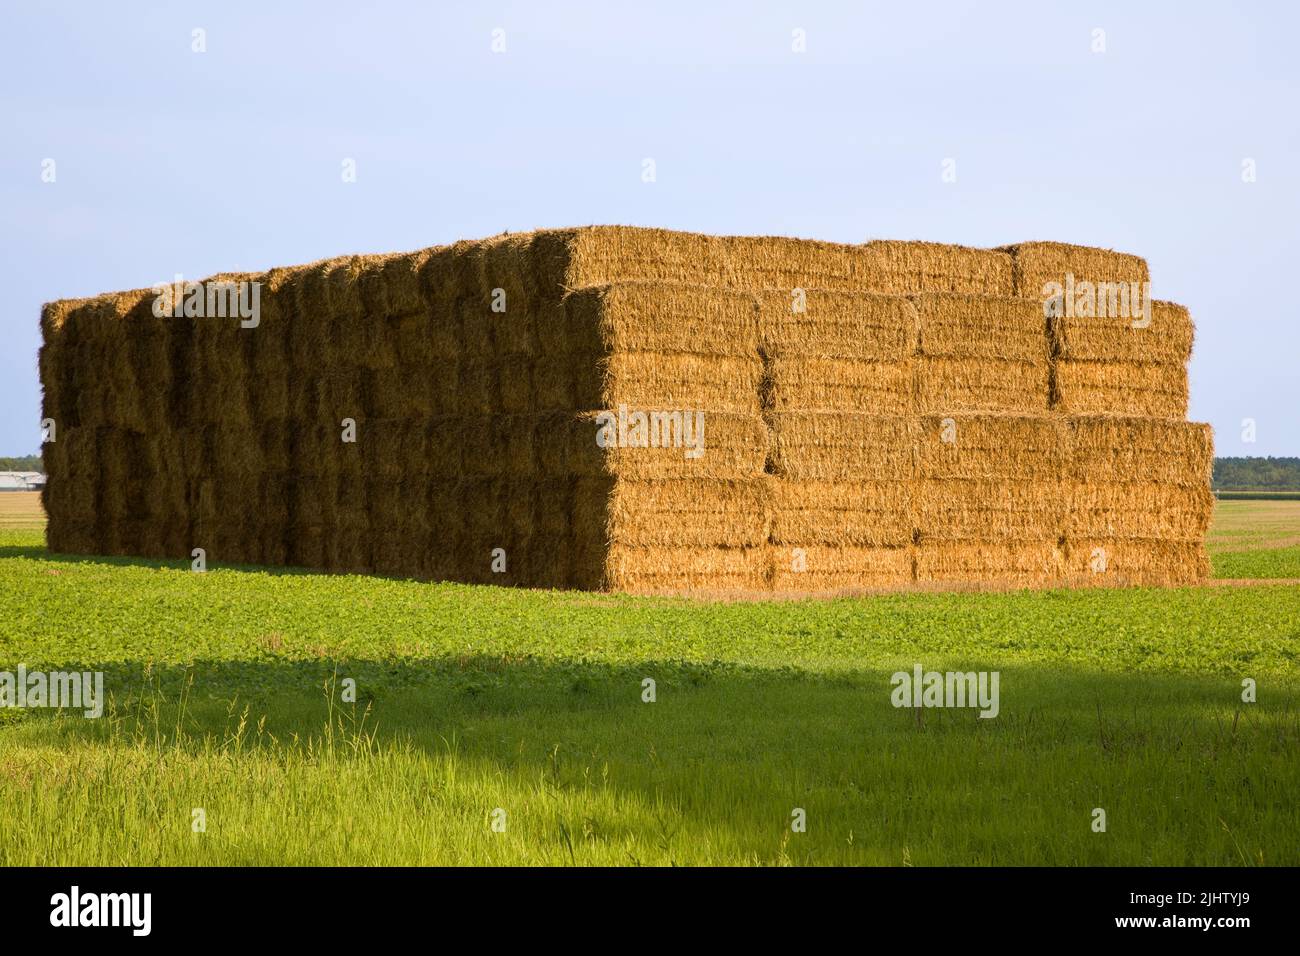 Stack of Rectangular Hay Bales of dry straw in a field outdoors. Stock Photo